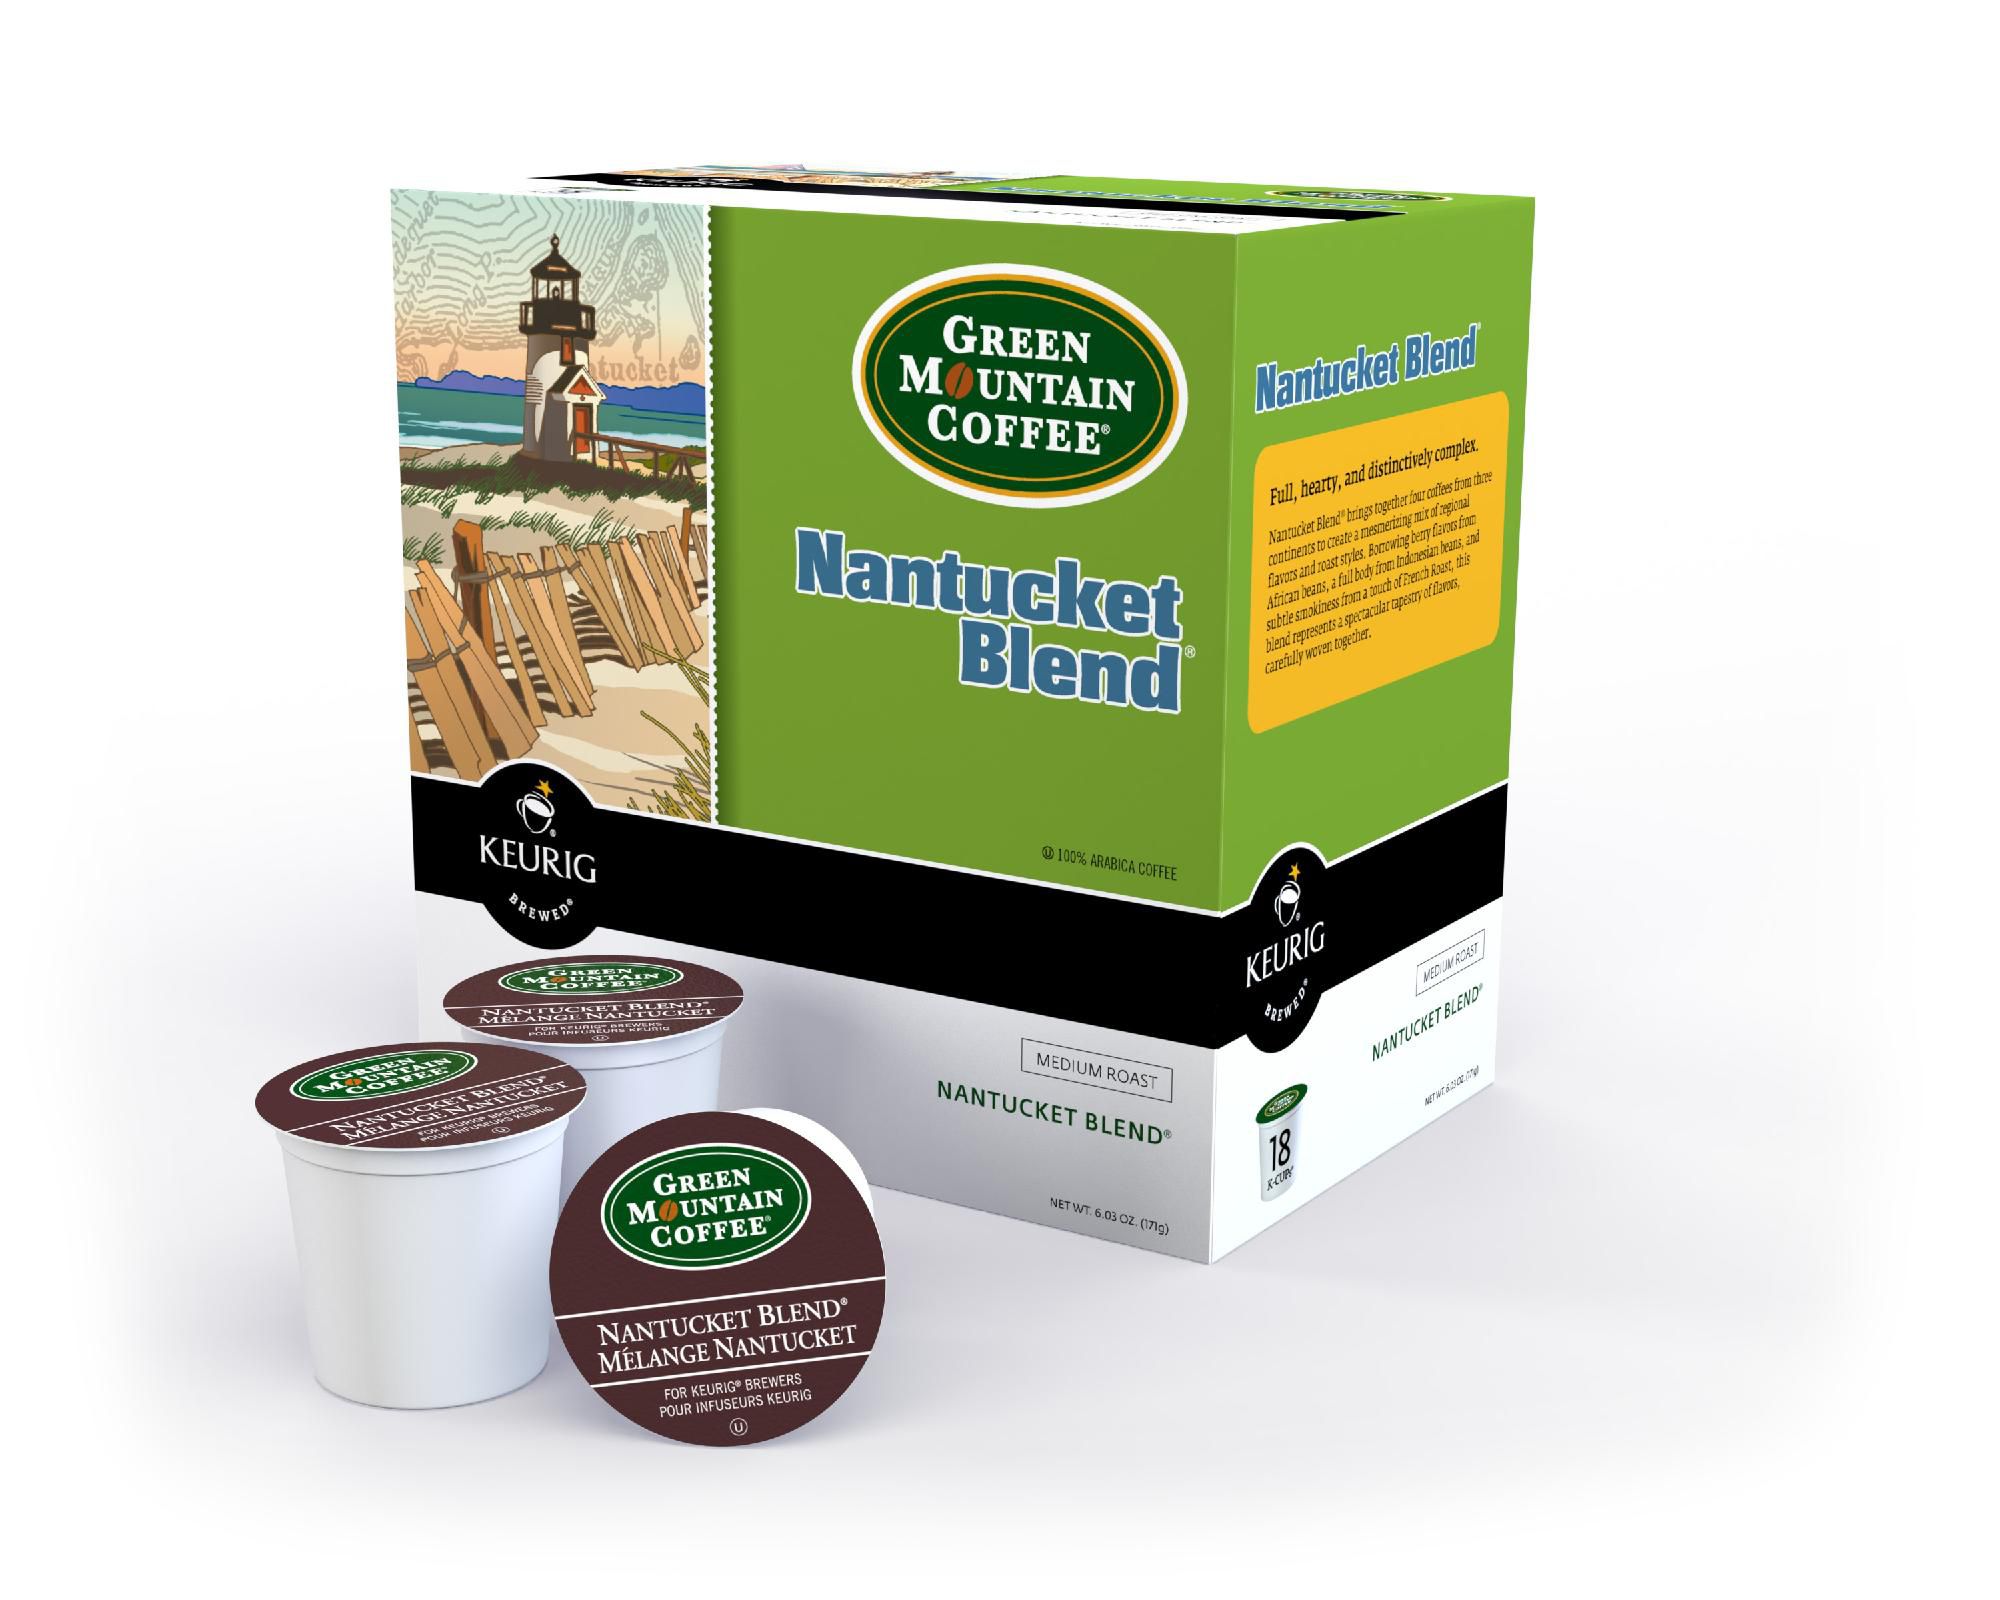 Green Mountain Nantucket Blend For Keurig K-Cup Brewing Systems, 108-pk